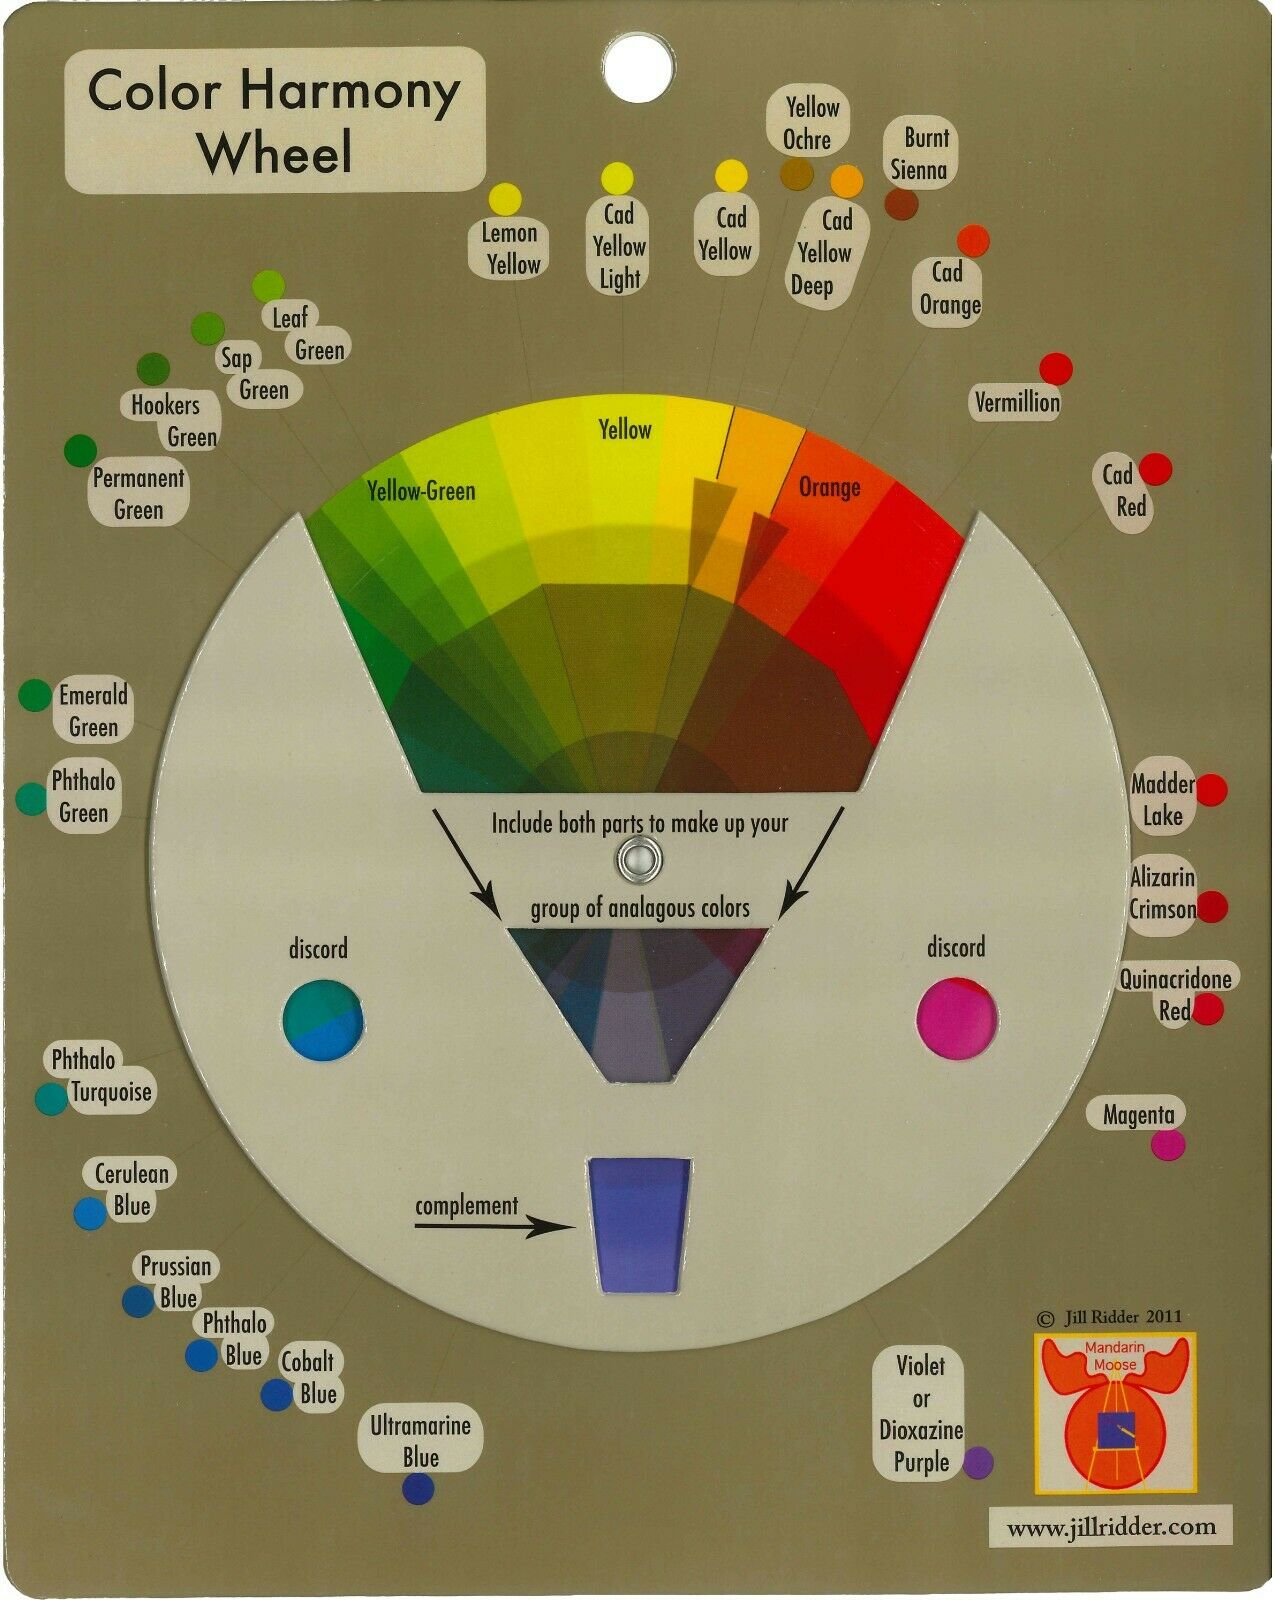 Color Harmony Wheel by Mandarin Moose - The Perfect Tool for Outstanding Art